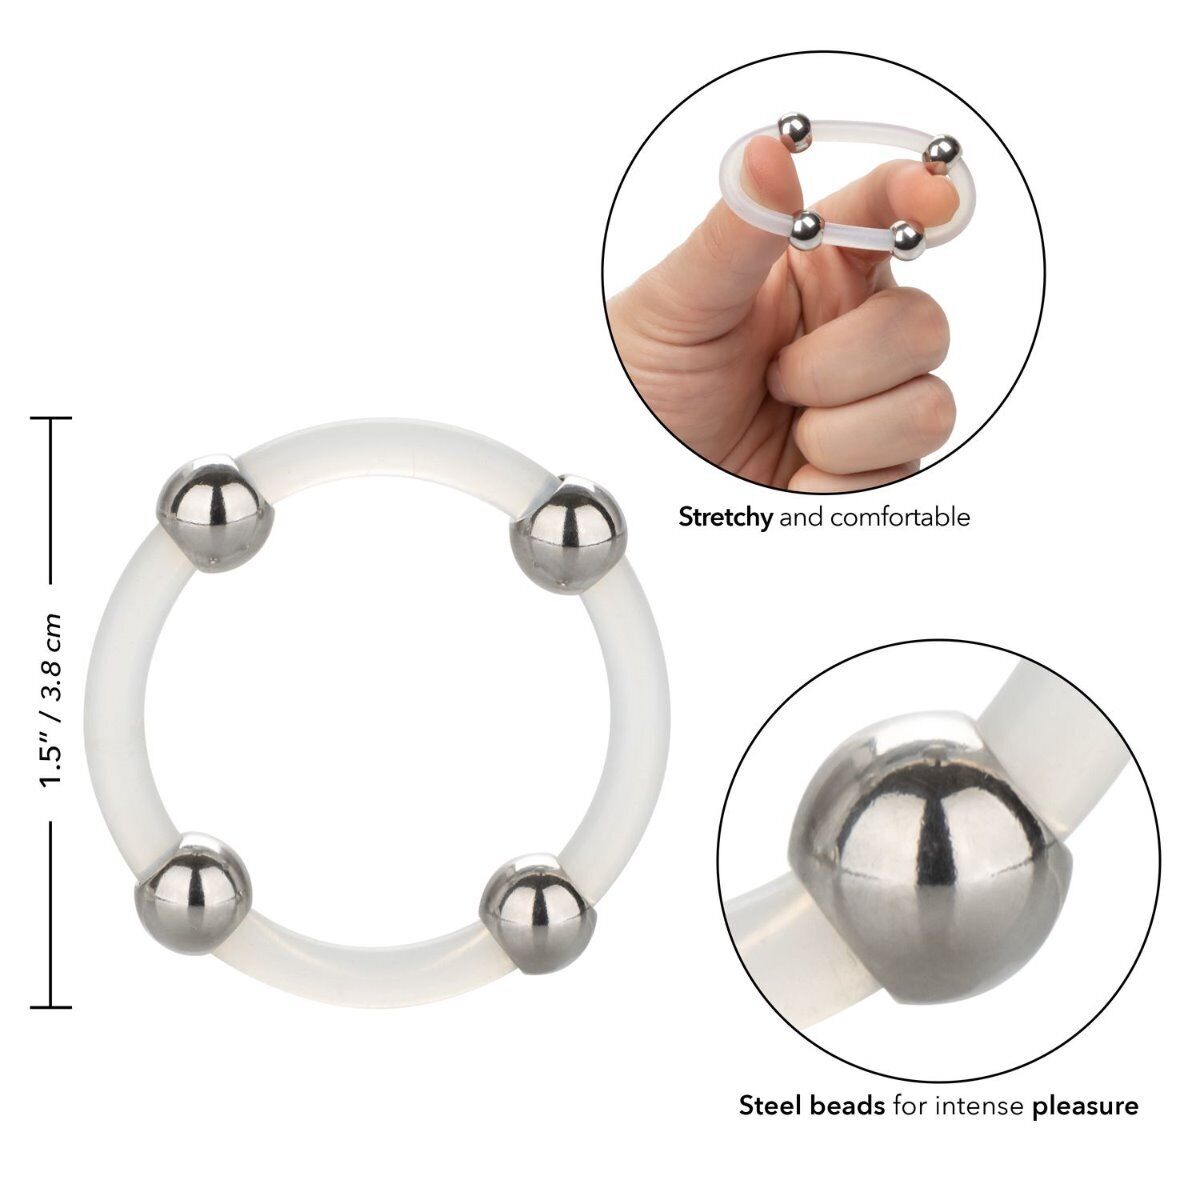 Large Steel Beaded Silicone Penis Cock Ring Sex-toys for Men Couples